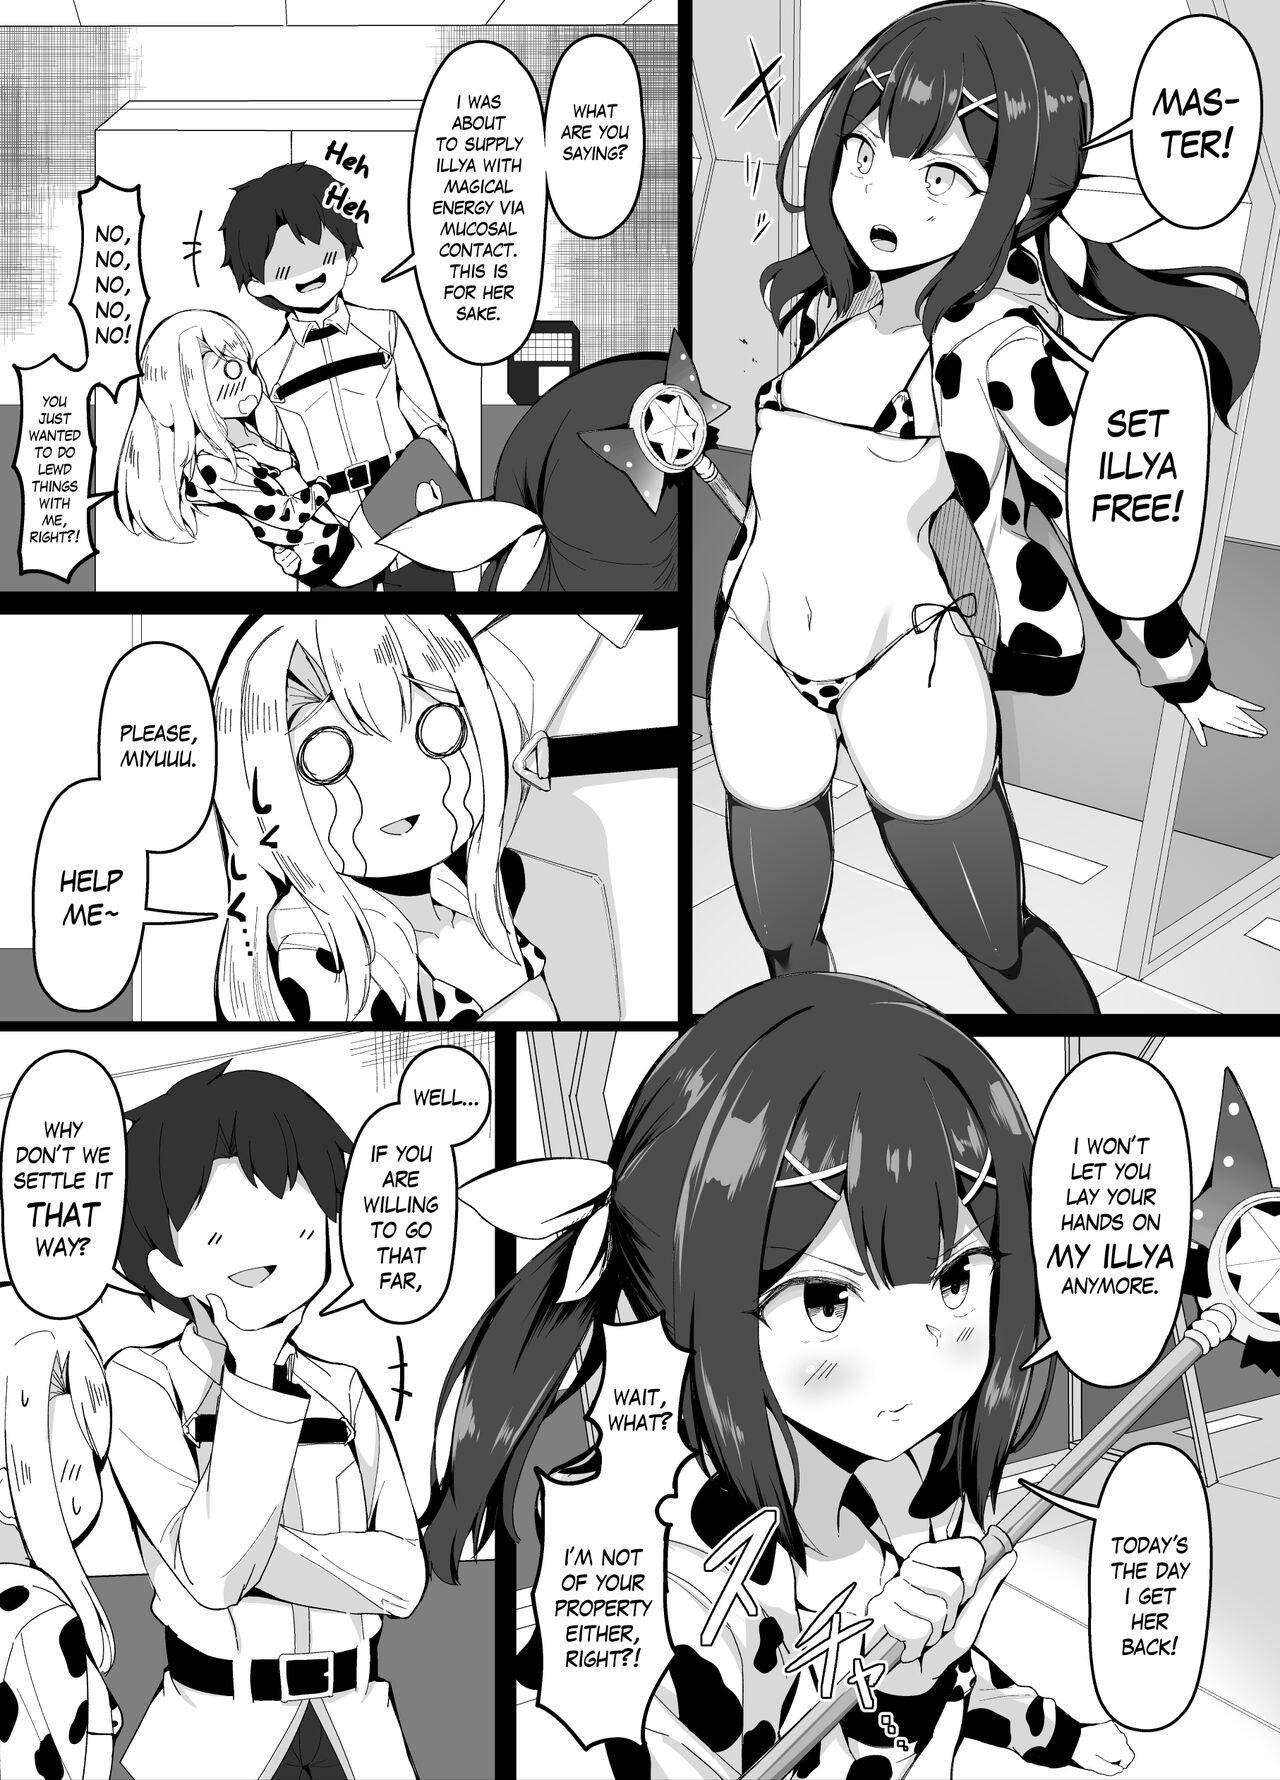 Oppai ni Makete Shimau Master | Master can't win against boobs 1